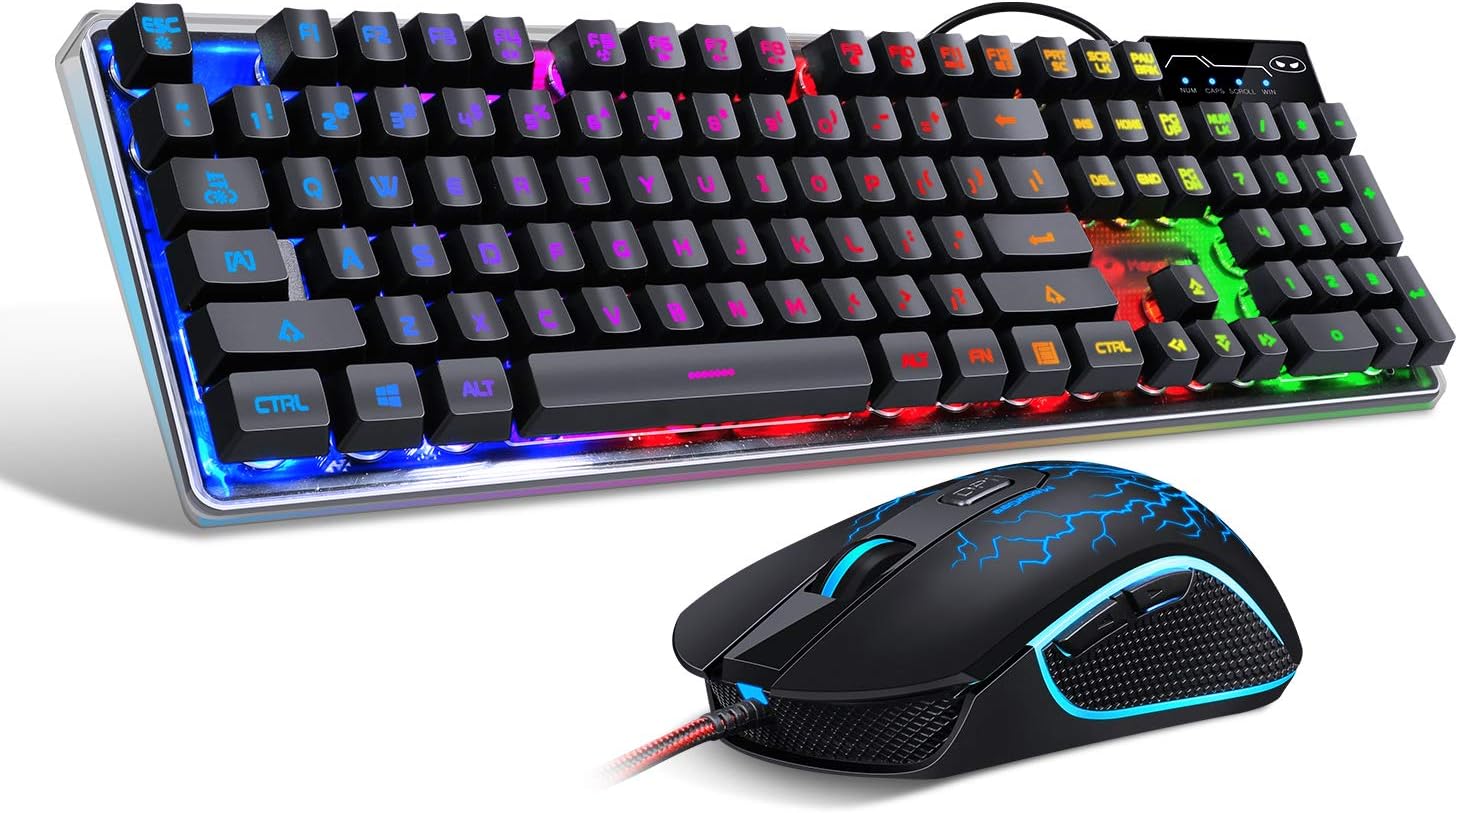 Gaming Keyboard and Mouse Combo, K1 LED Rainbow Backlit Keyboard with 104 Key for Computer/PC/Laptop